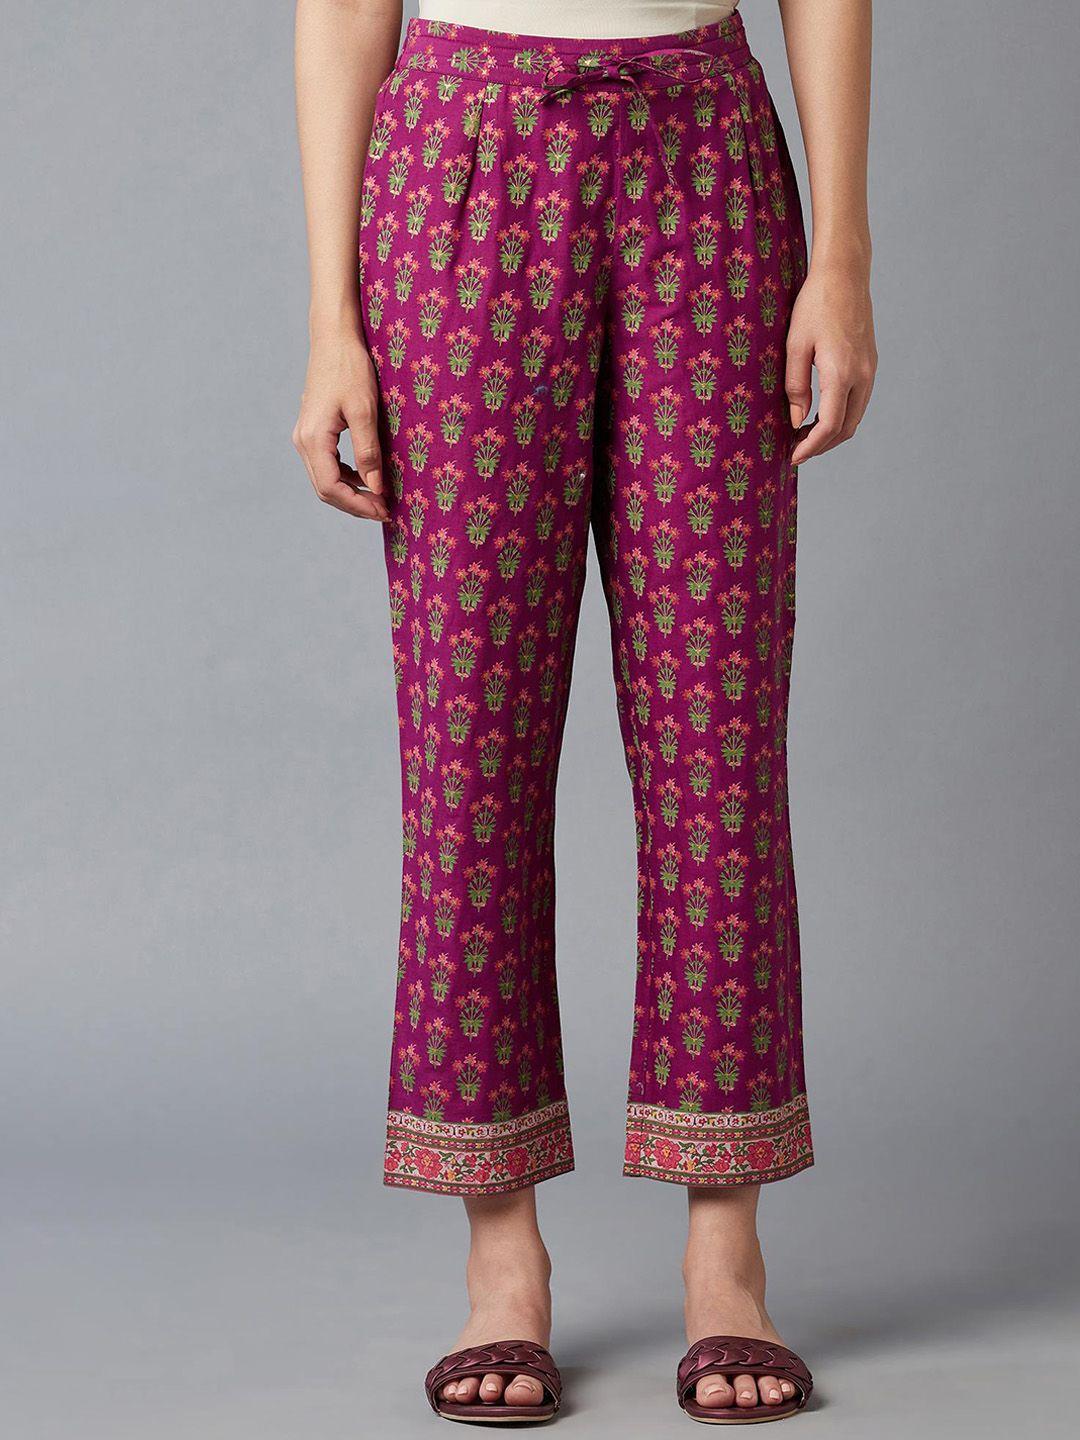 w-women-purple-floral-printed-trousers